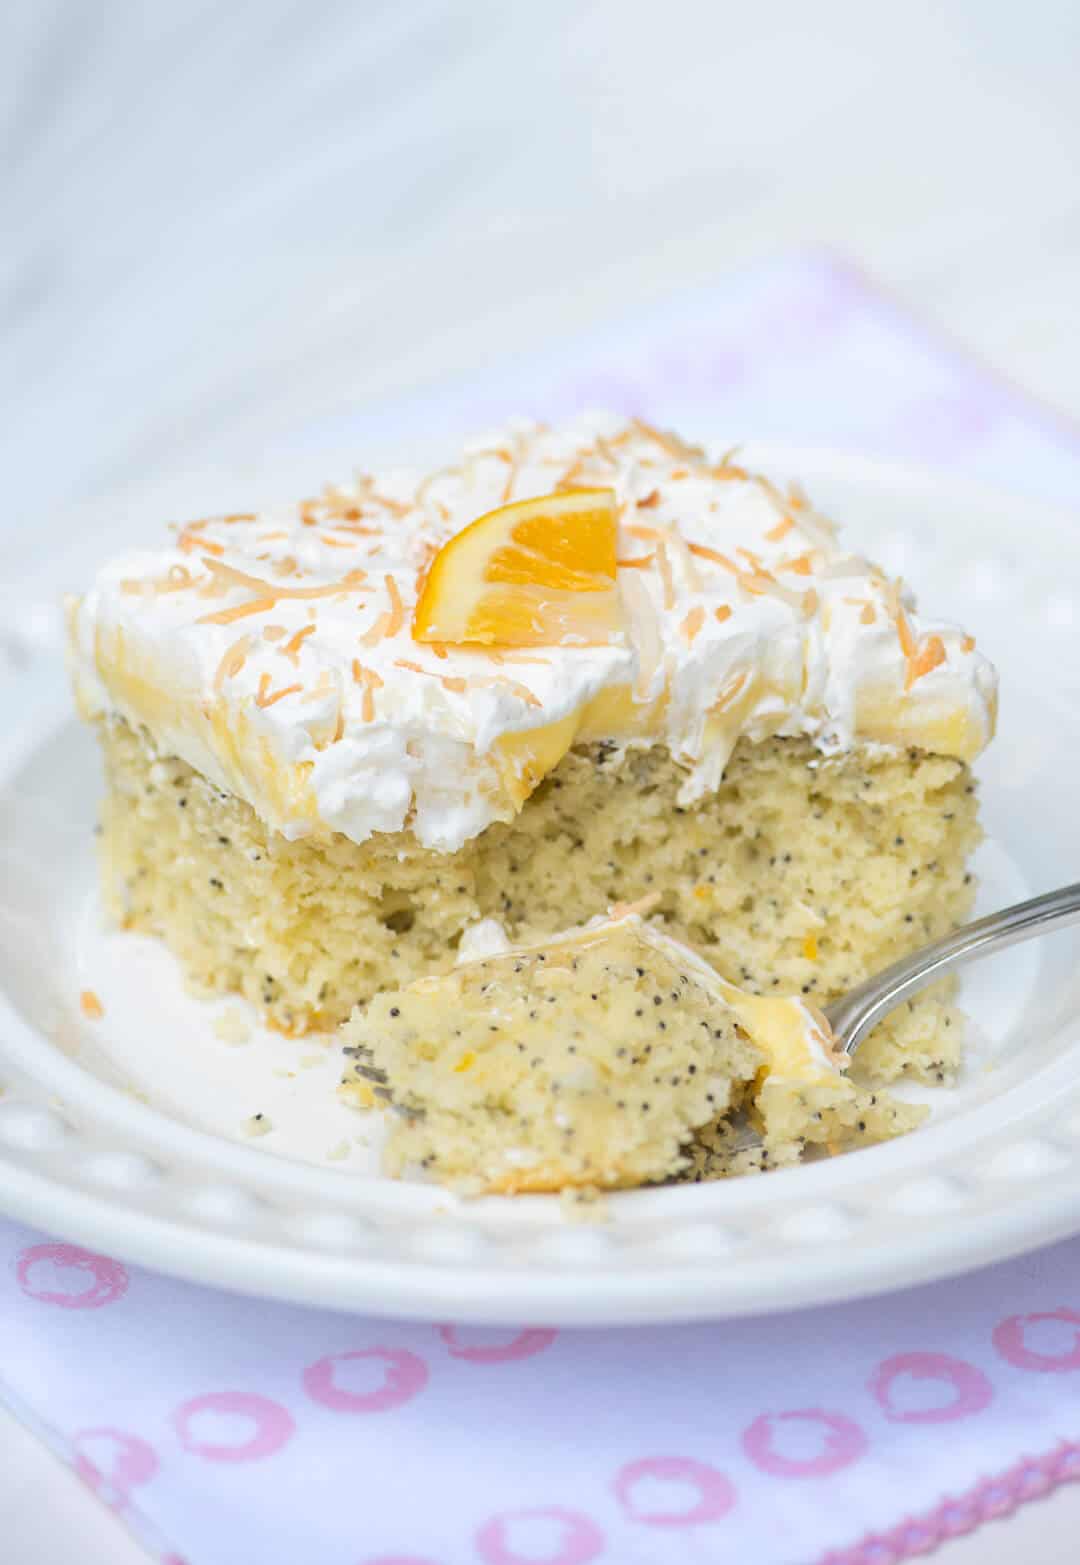 A slice of Lemon Coconut Poppy Seed Cake on a white plate with a fork.